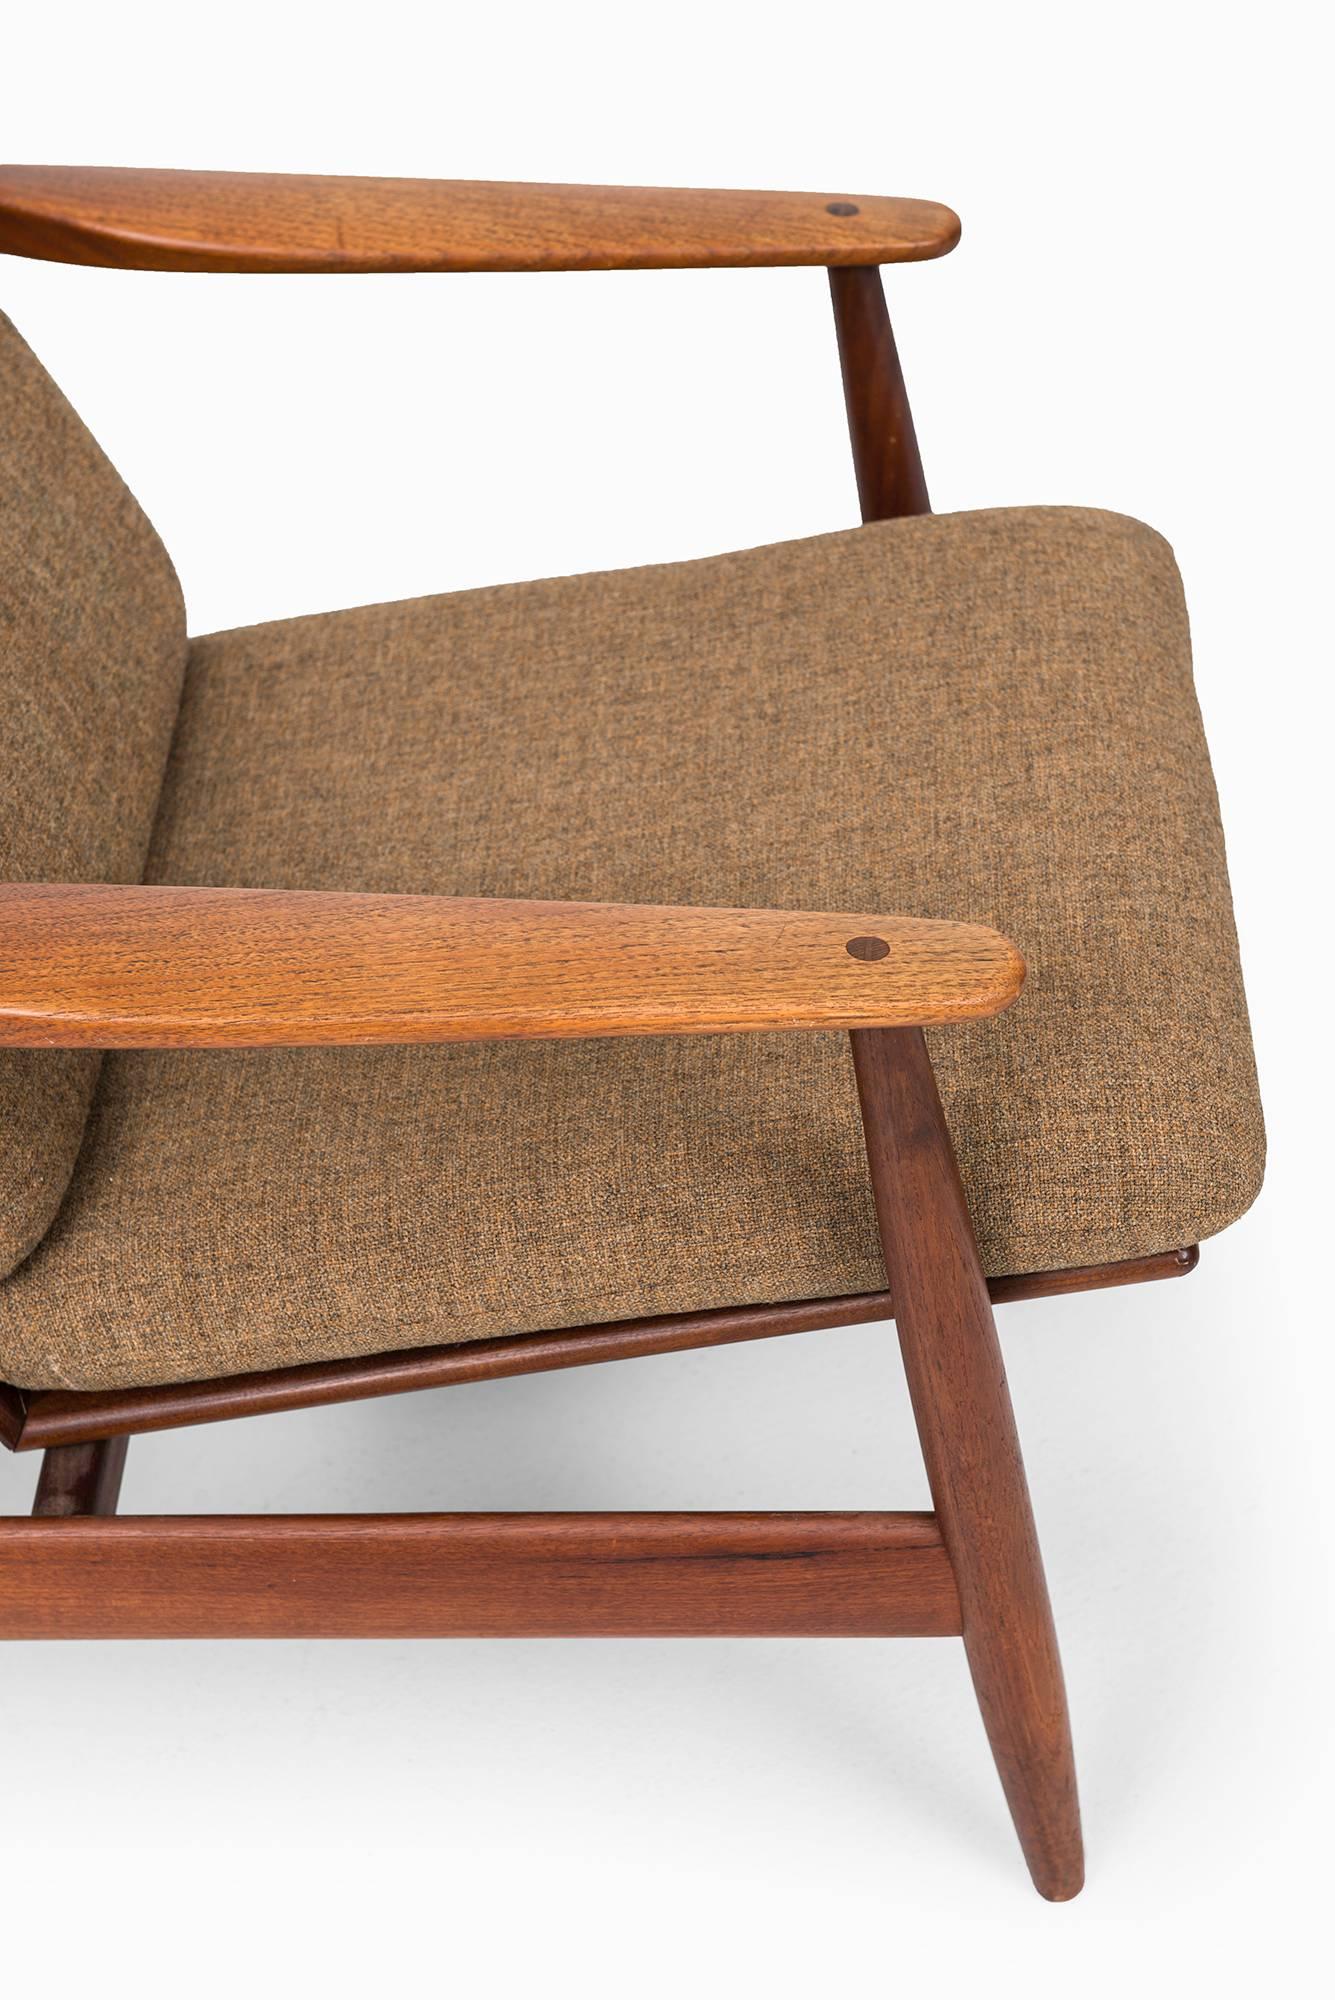 Danish Poul Volther Easy Chair Model 340 by Frem Røjle in Denmark